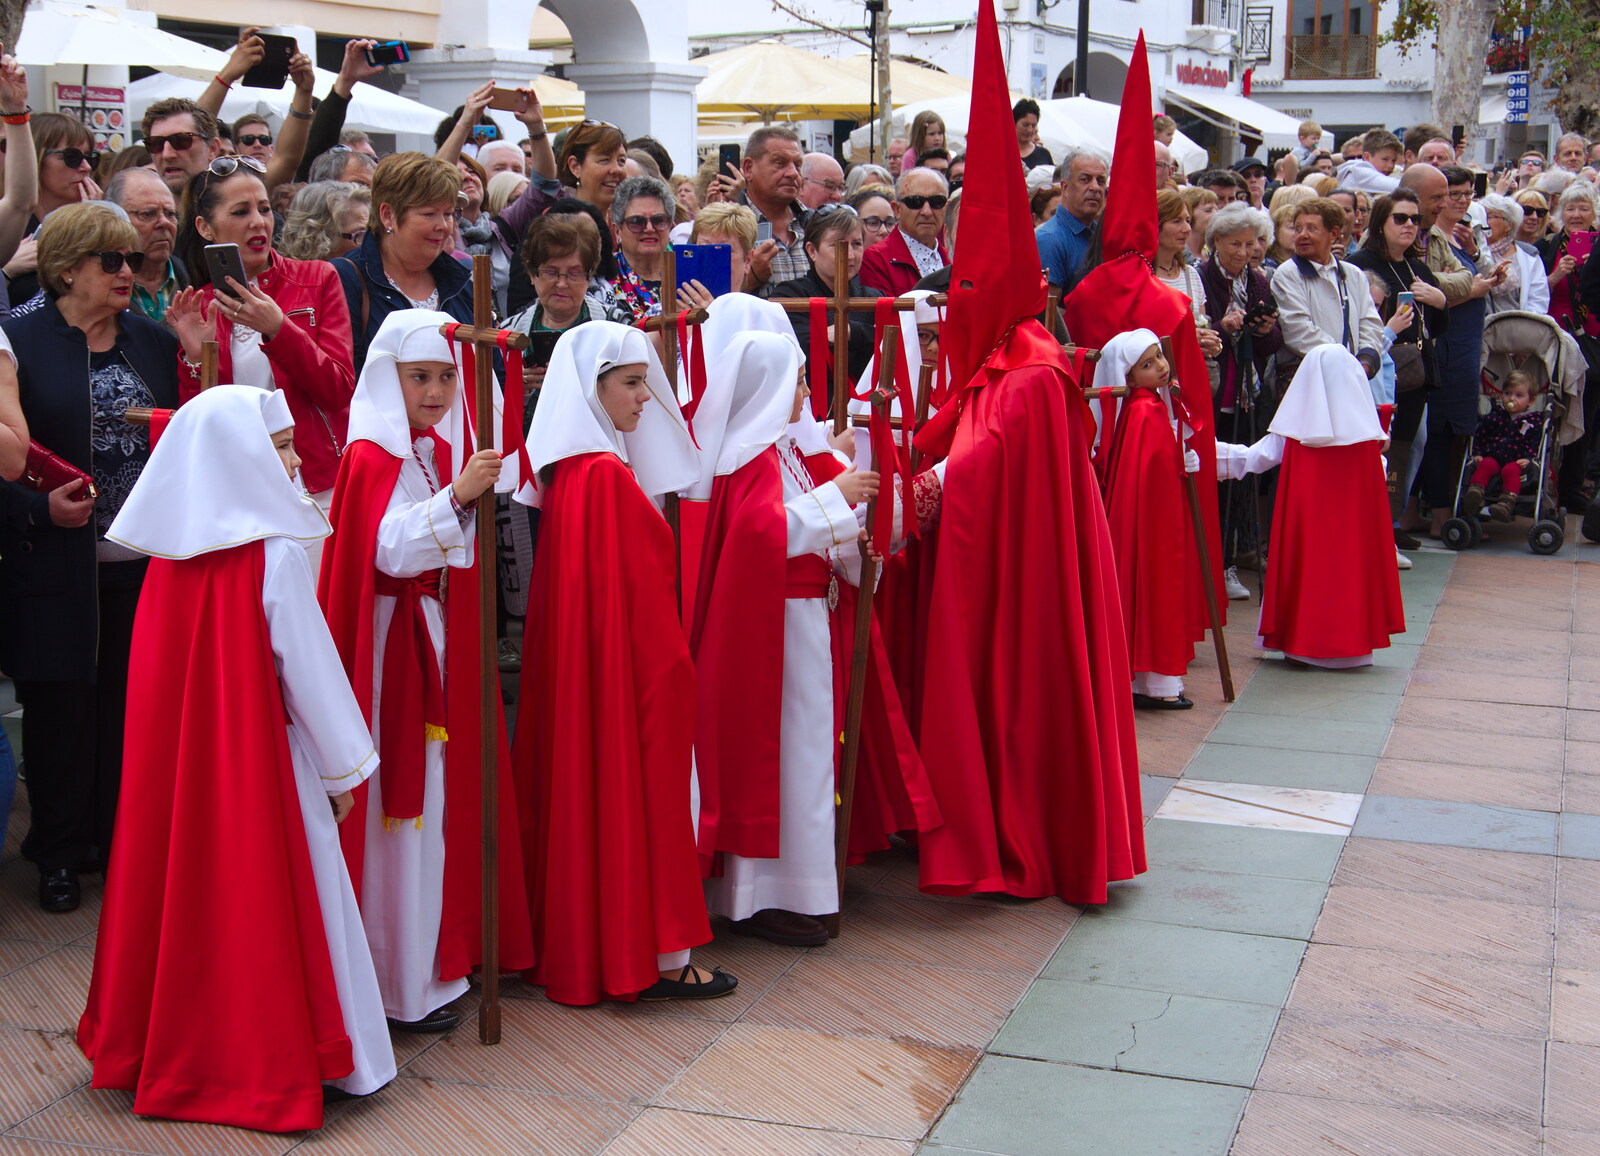 The pointy hats, or Capirotes, represent penitence from An Easter Parade, Nerja, Andalusia, Spain - 21st April 2019